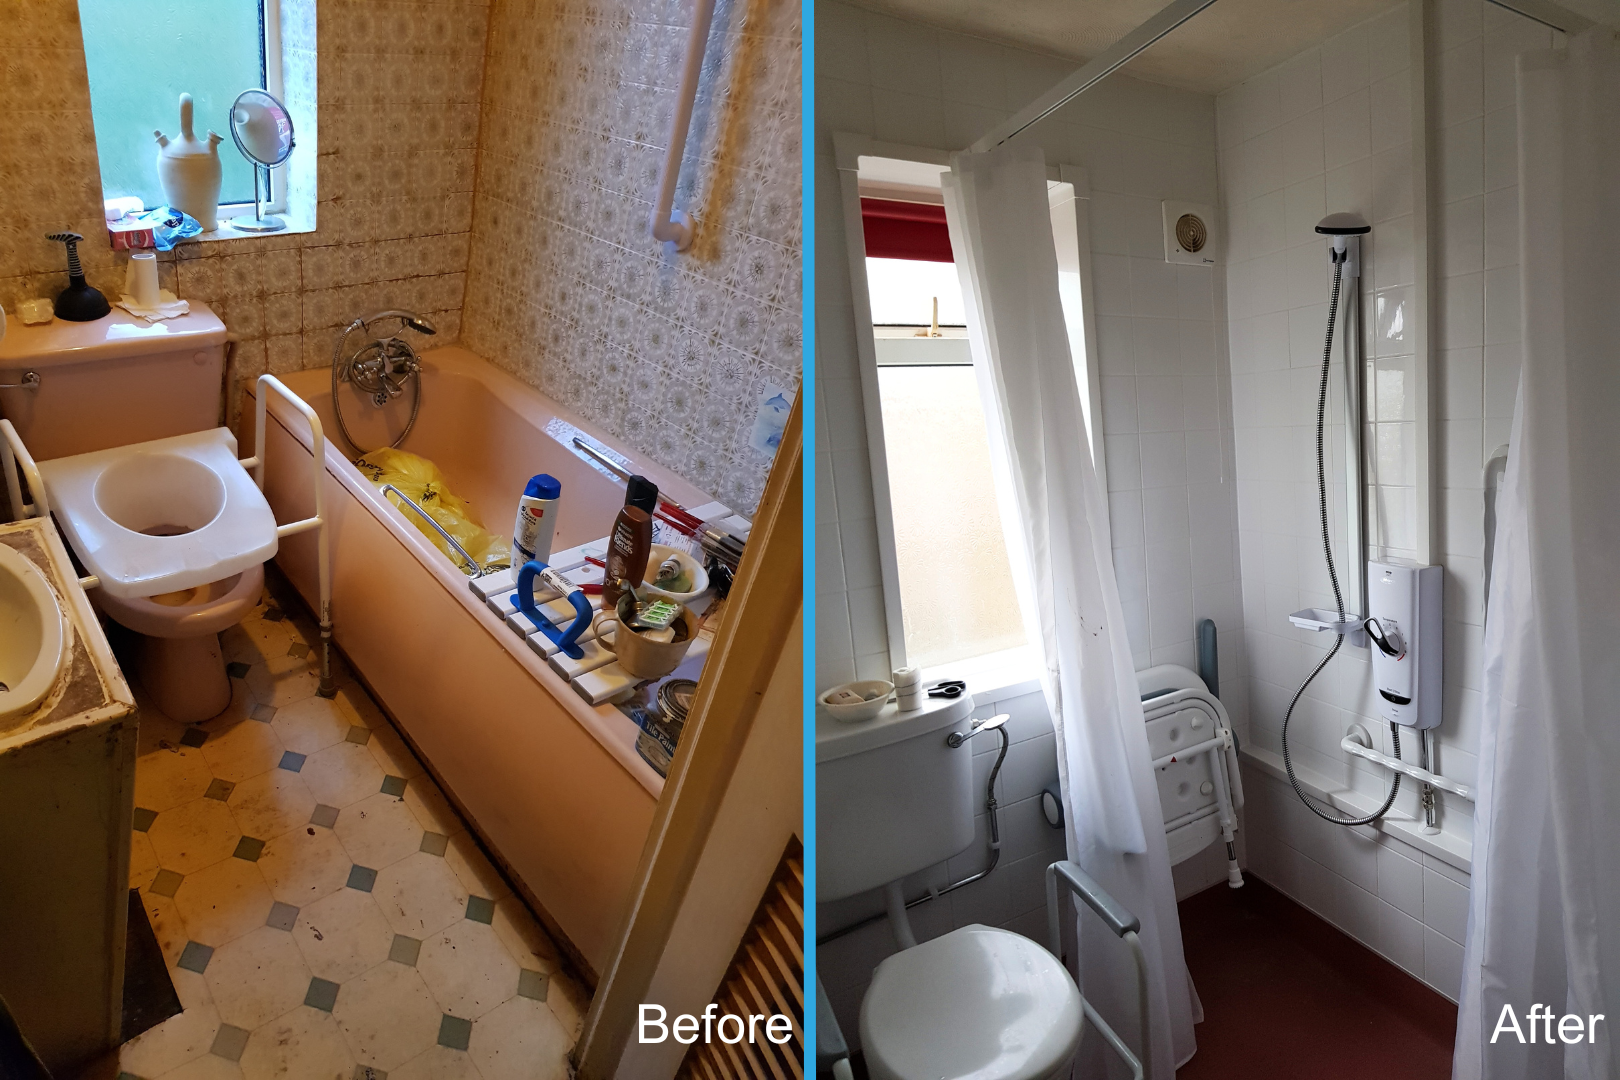 Picture shows the before and after of a bathroom renovation